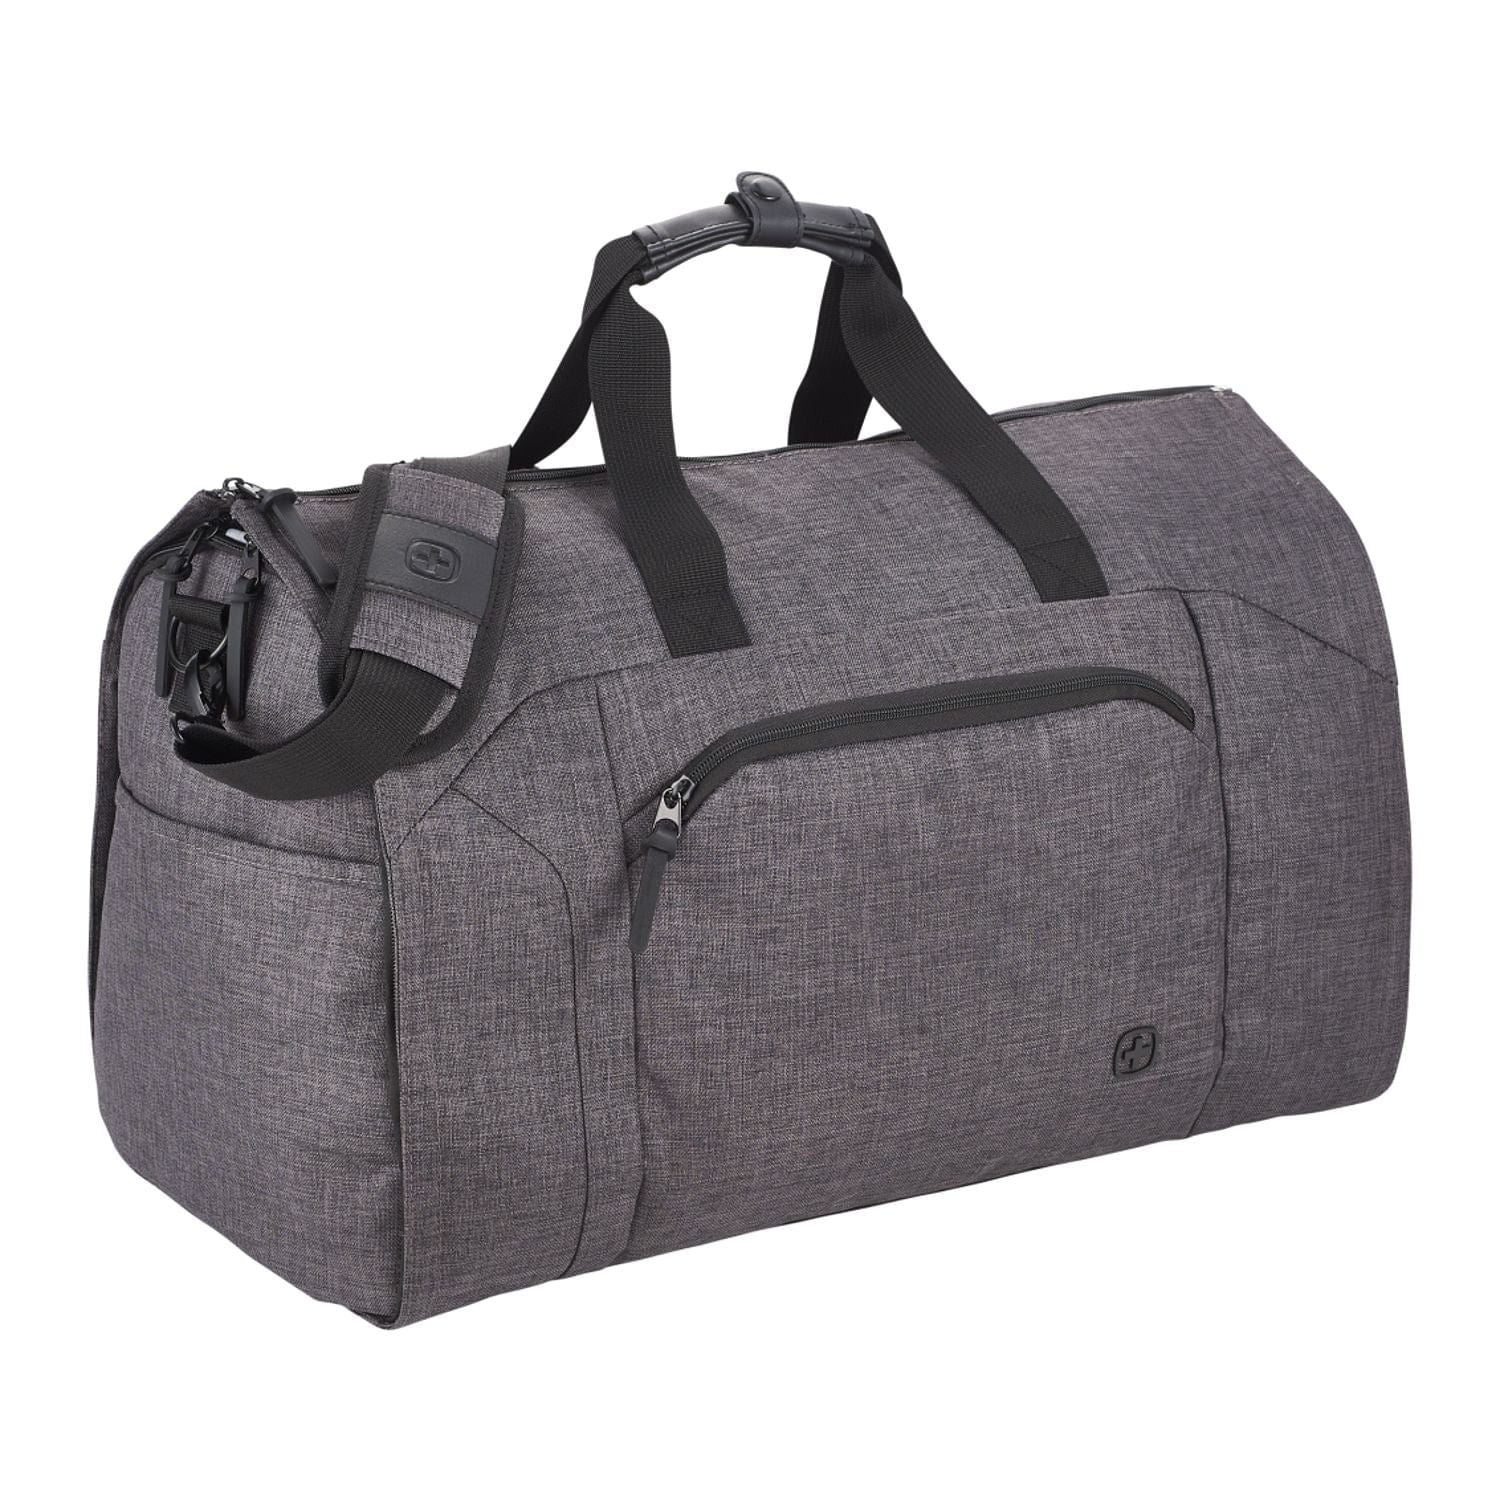 Wenger Bags One Size / Charcoal Wenger - RPET Garment Duffel